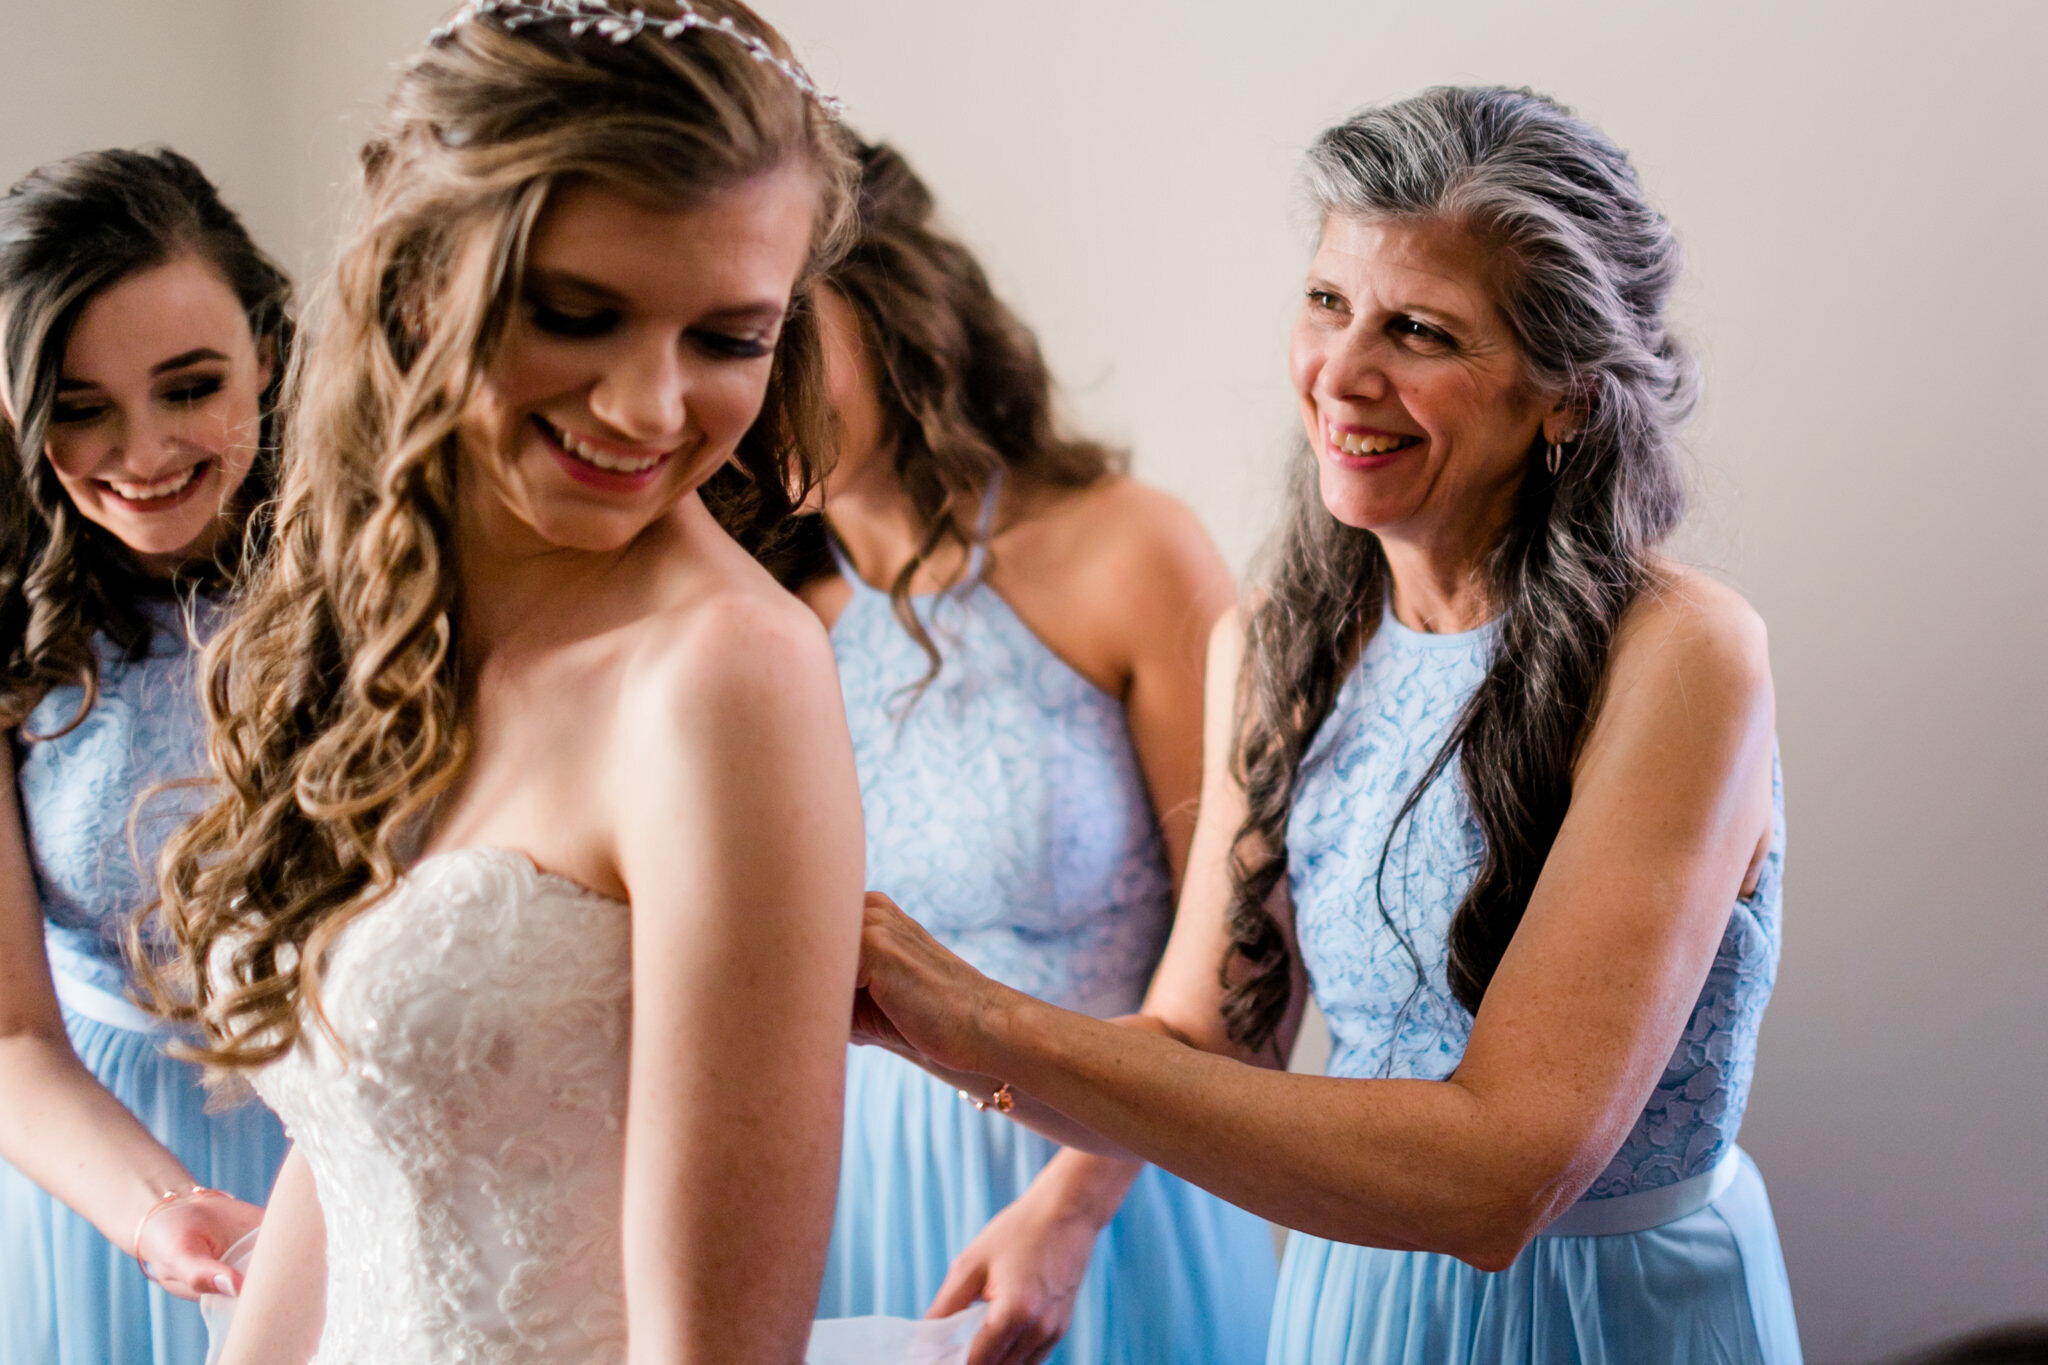 Durham Wedding Photographer | By G. Lin Photography | Mother of the bride zipping up bride